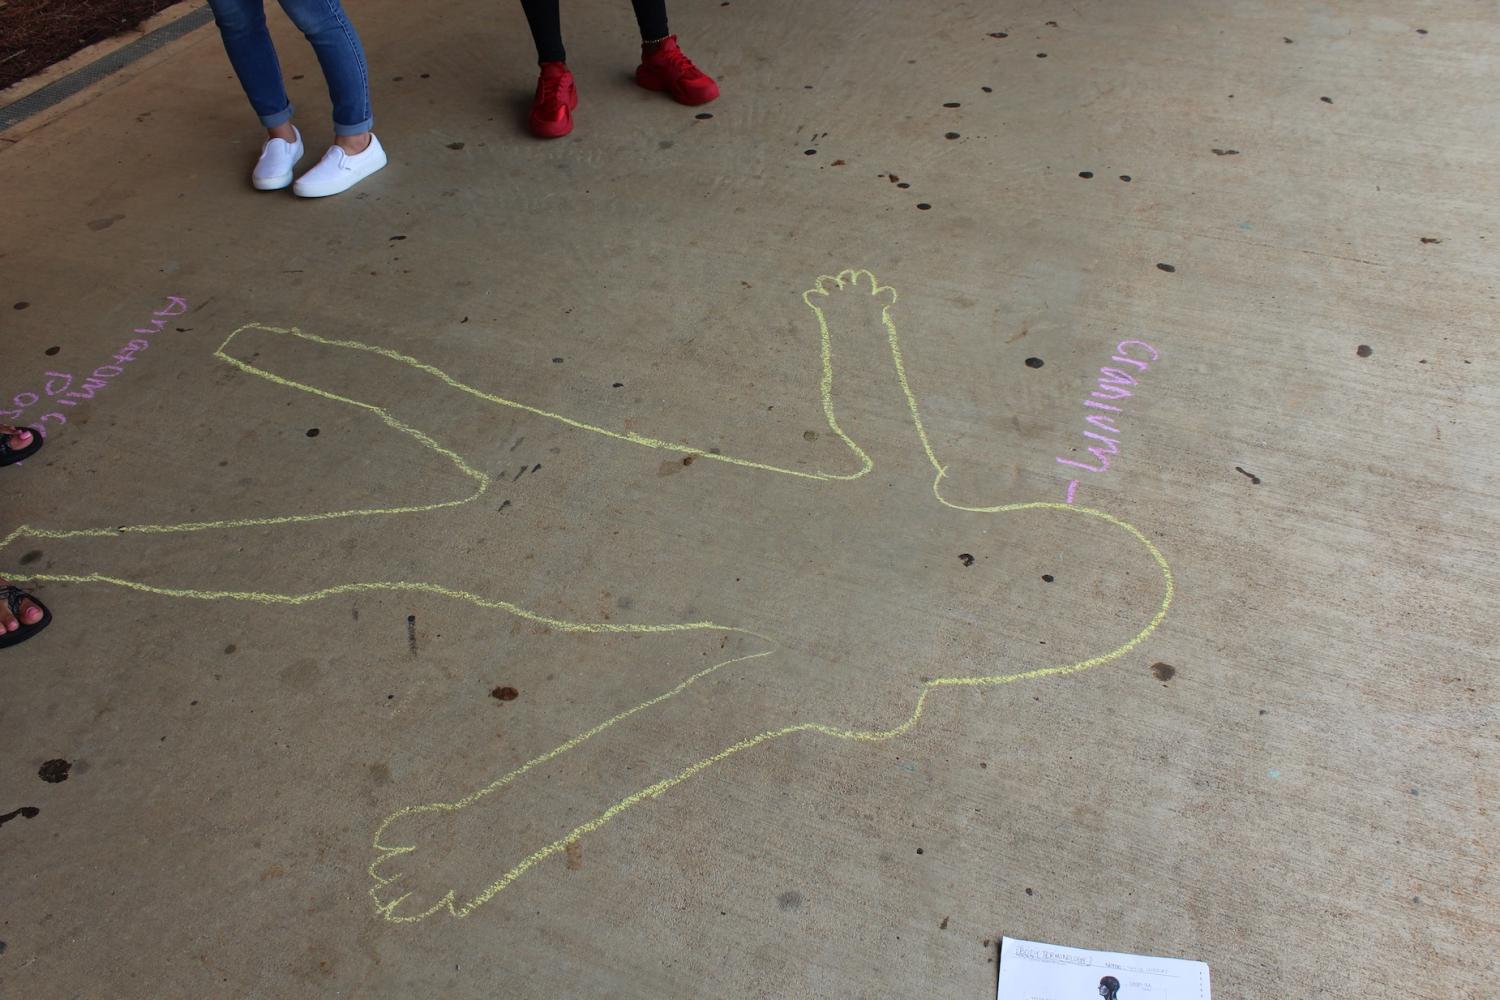 Today, Mrs. Adams’ third period anatomy class partnered up to trace and label the body system. They sketched the body in both prone and anatomical positions, a fundamental concept in anatomy. “Its a fun activity and it helps me visualize how the body works,” junior Moya Perez said.  